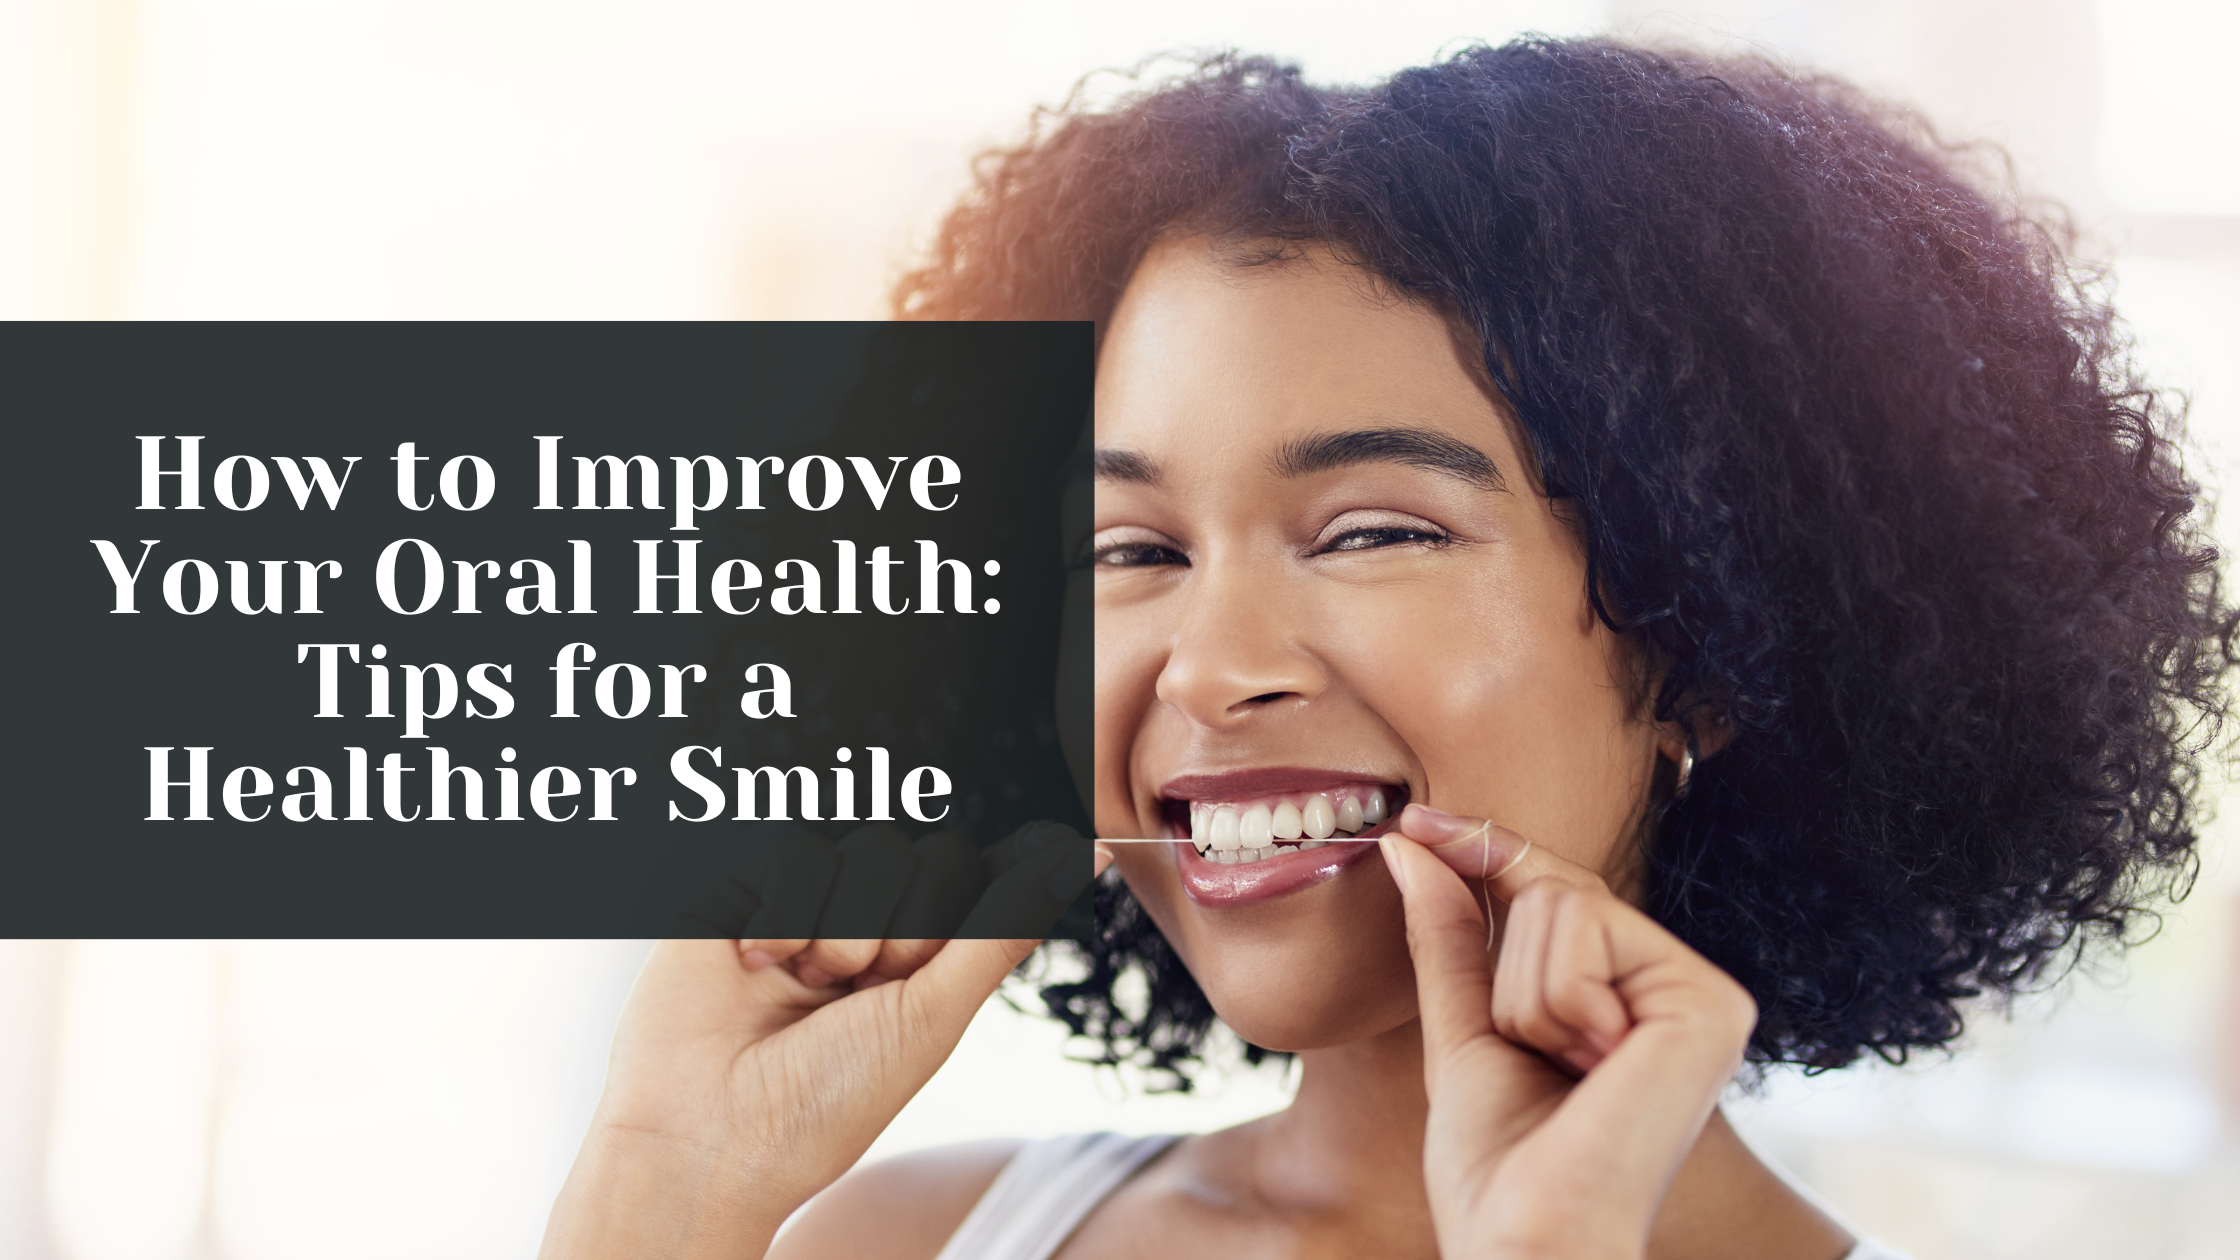 How to Improve Your Oral Health: Tips for a Healthier Smile